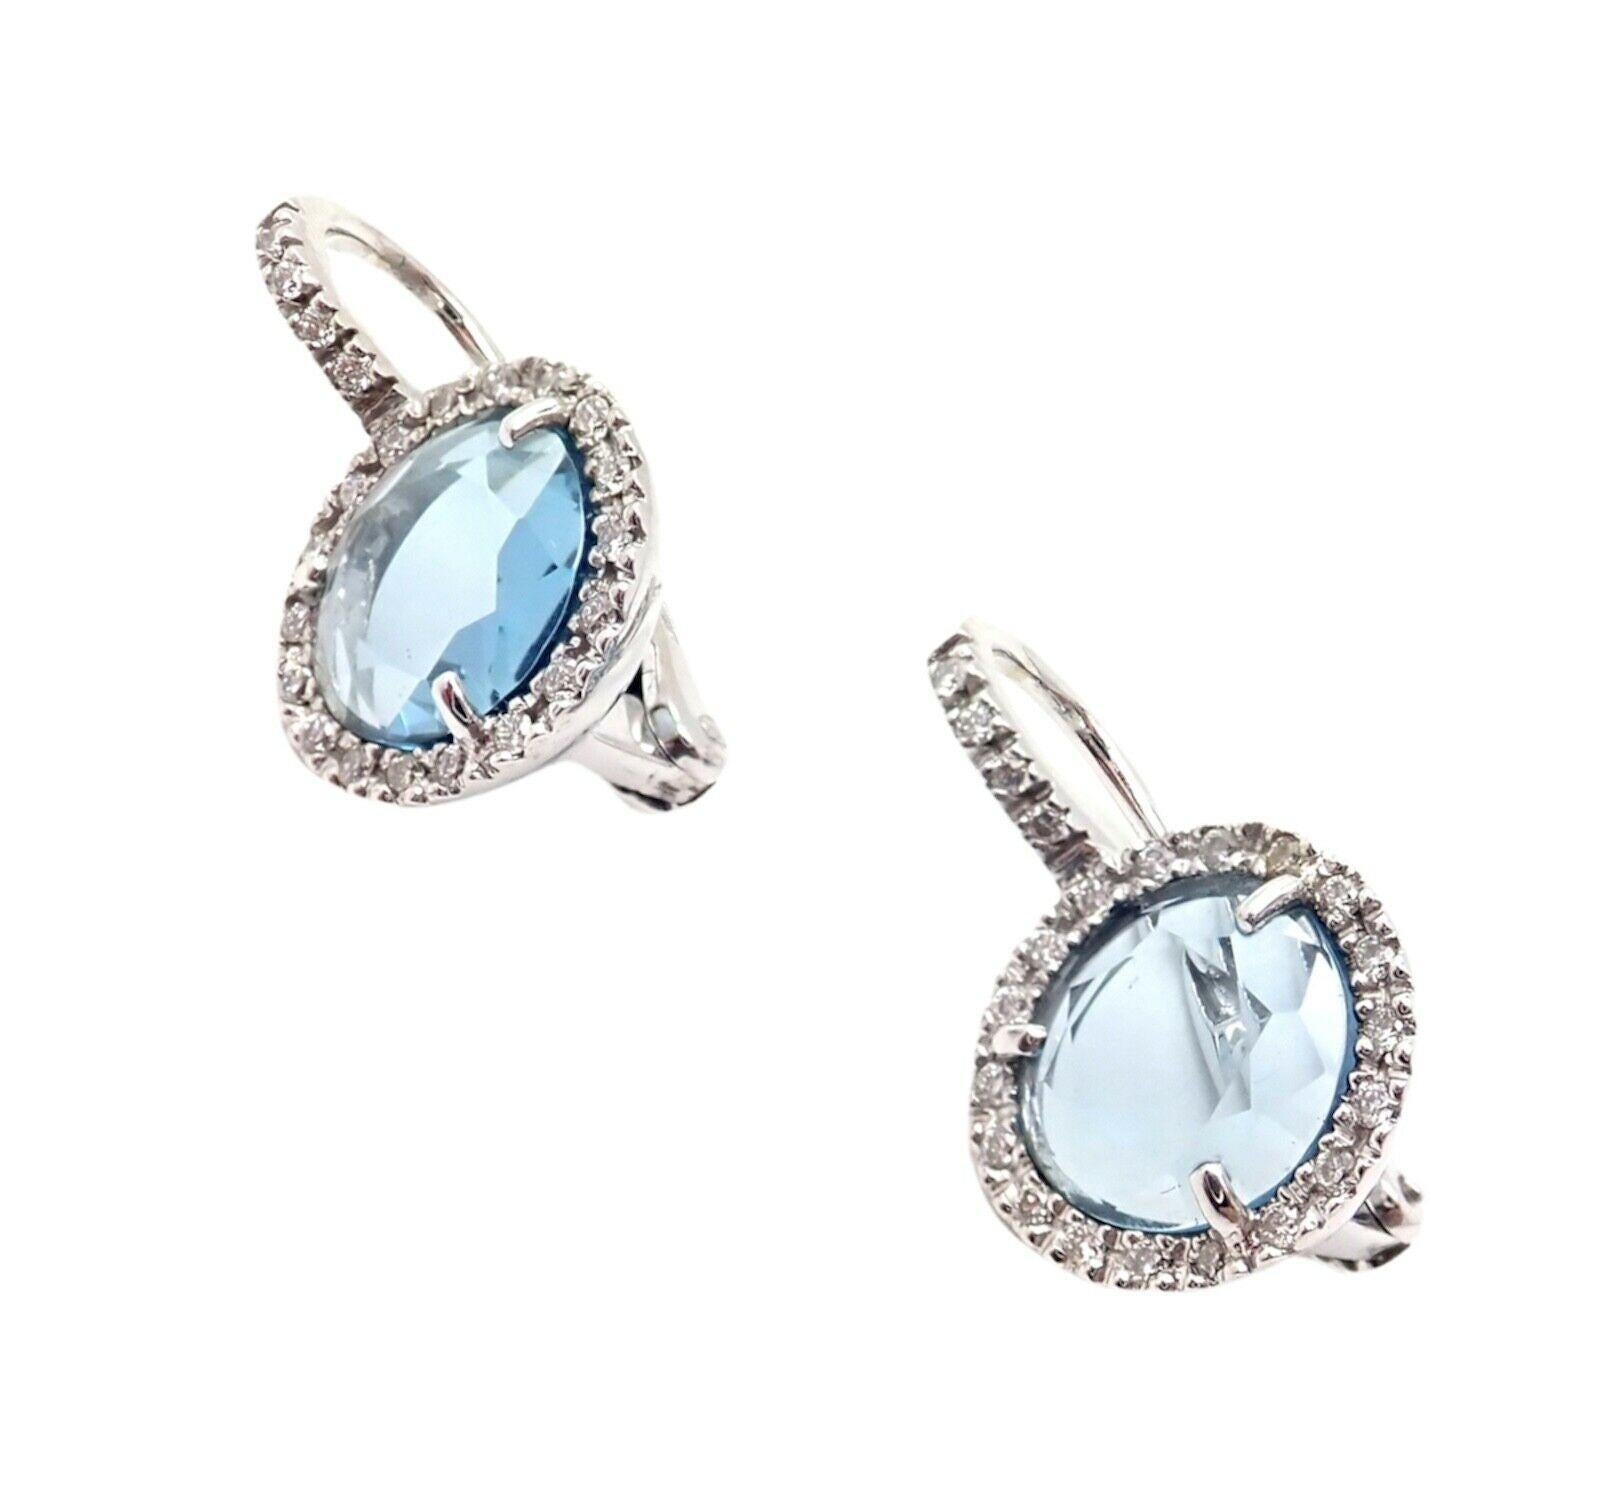 18k White Gold Diamond Blue Topaz Colpo Di Fulmine Earrings by Pomellato.
With 2 Oval Blue Topaz Stones - 9mm x 8mm
46 Brilliant Round Diamonds - 0.45ctw
These earrings are for pierced ears.
Details:
Measurements: Total - 20mm Length
Pendant Size -